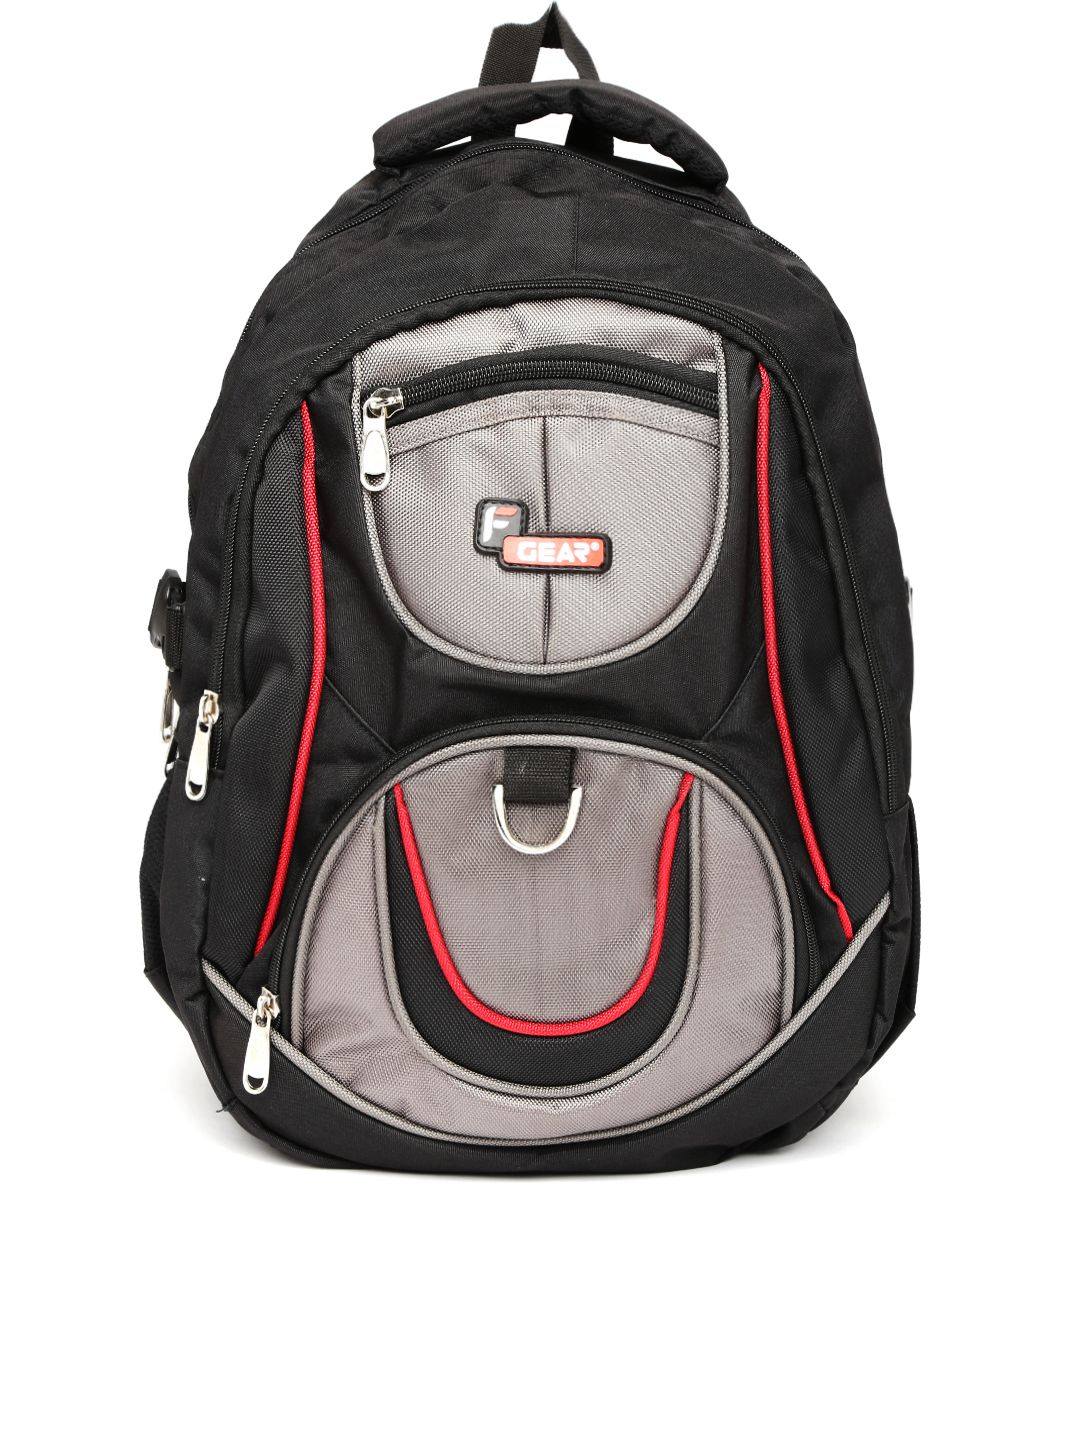 F Gear Unisex Black & Grey Axe Backpack Price in India